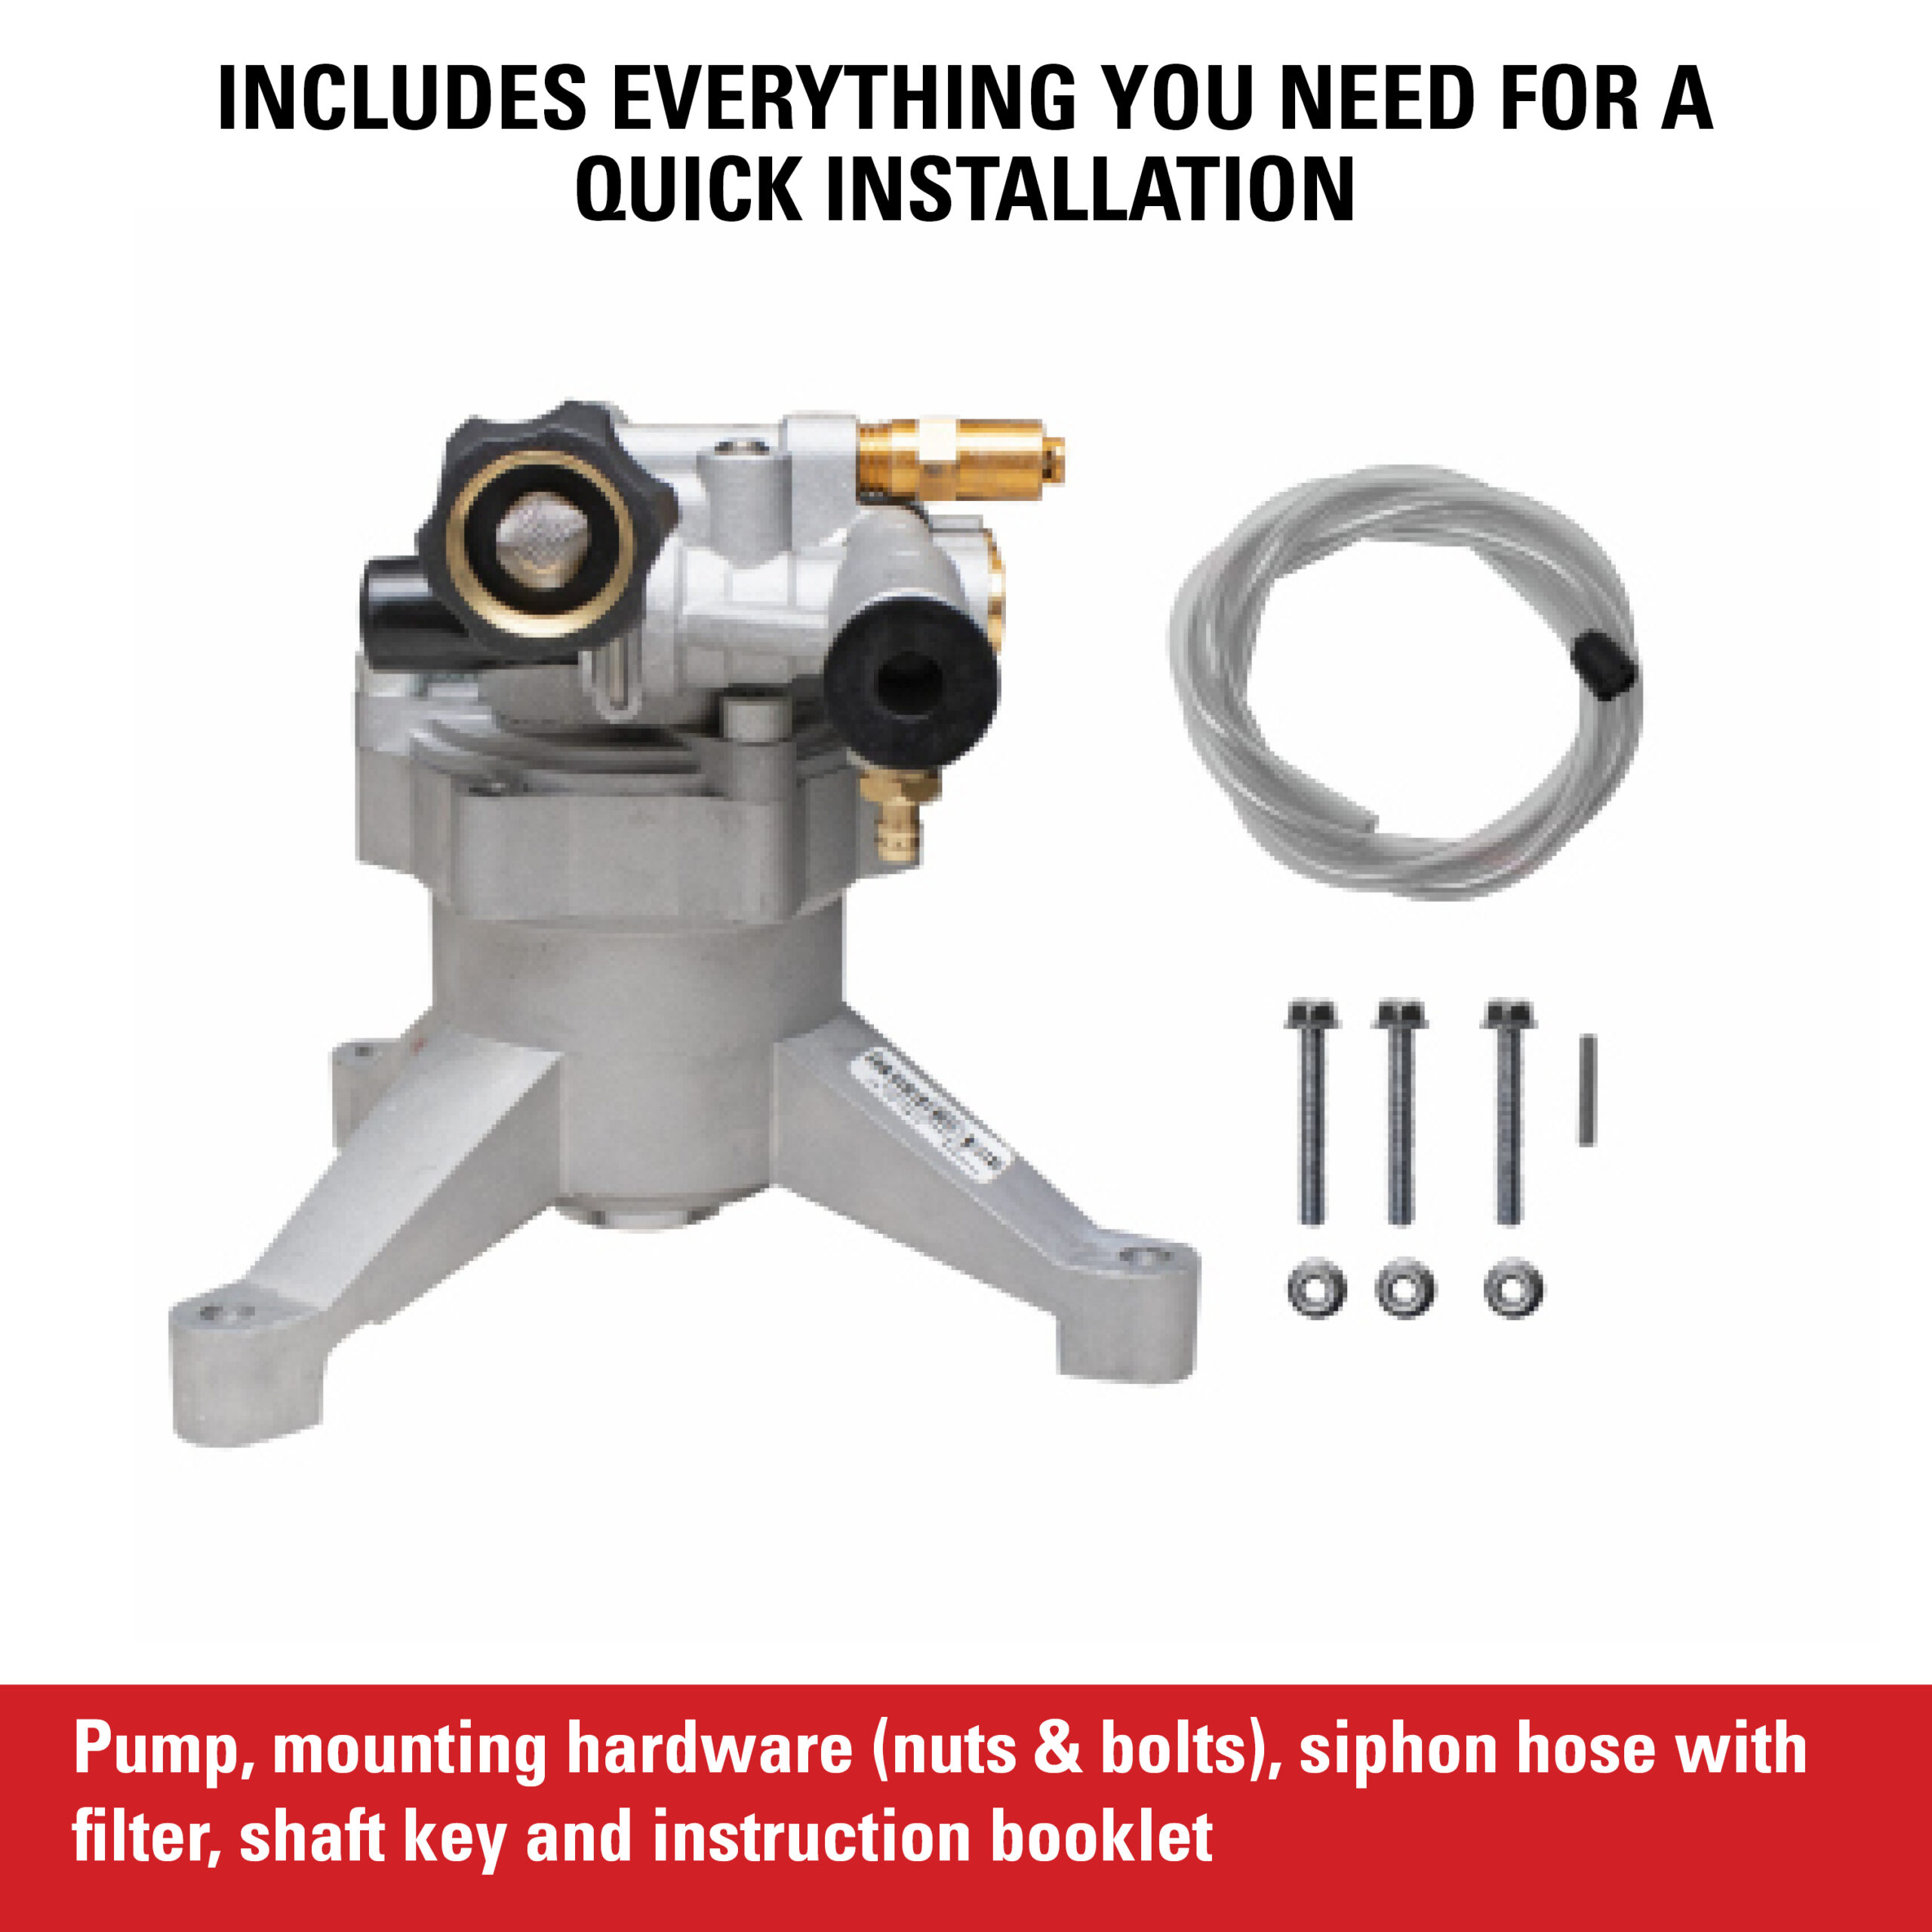 pressure washer; power washer; simpson; simpson cleaning; fna; fna group; oem technologies; aaa pump; pump; pressure washer pump; 3100 psi; 2.4 gpm; axial pump; vertical; silver aluminum body; silver aluminum head; gas pressure washer; 510030;